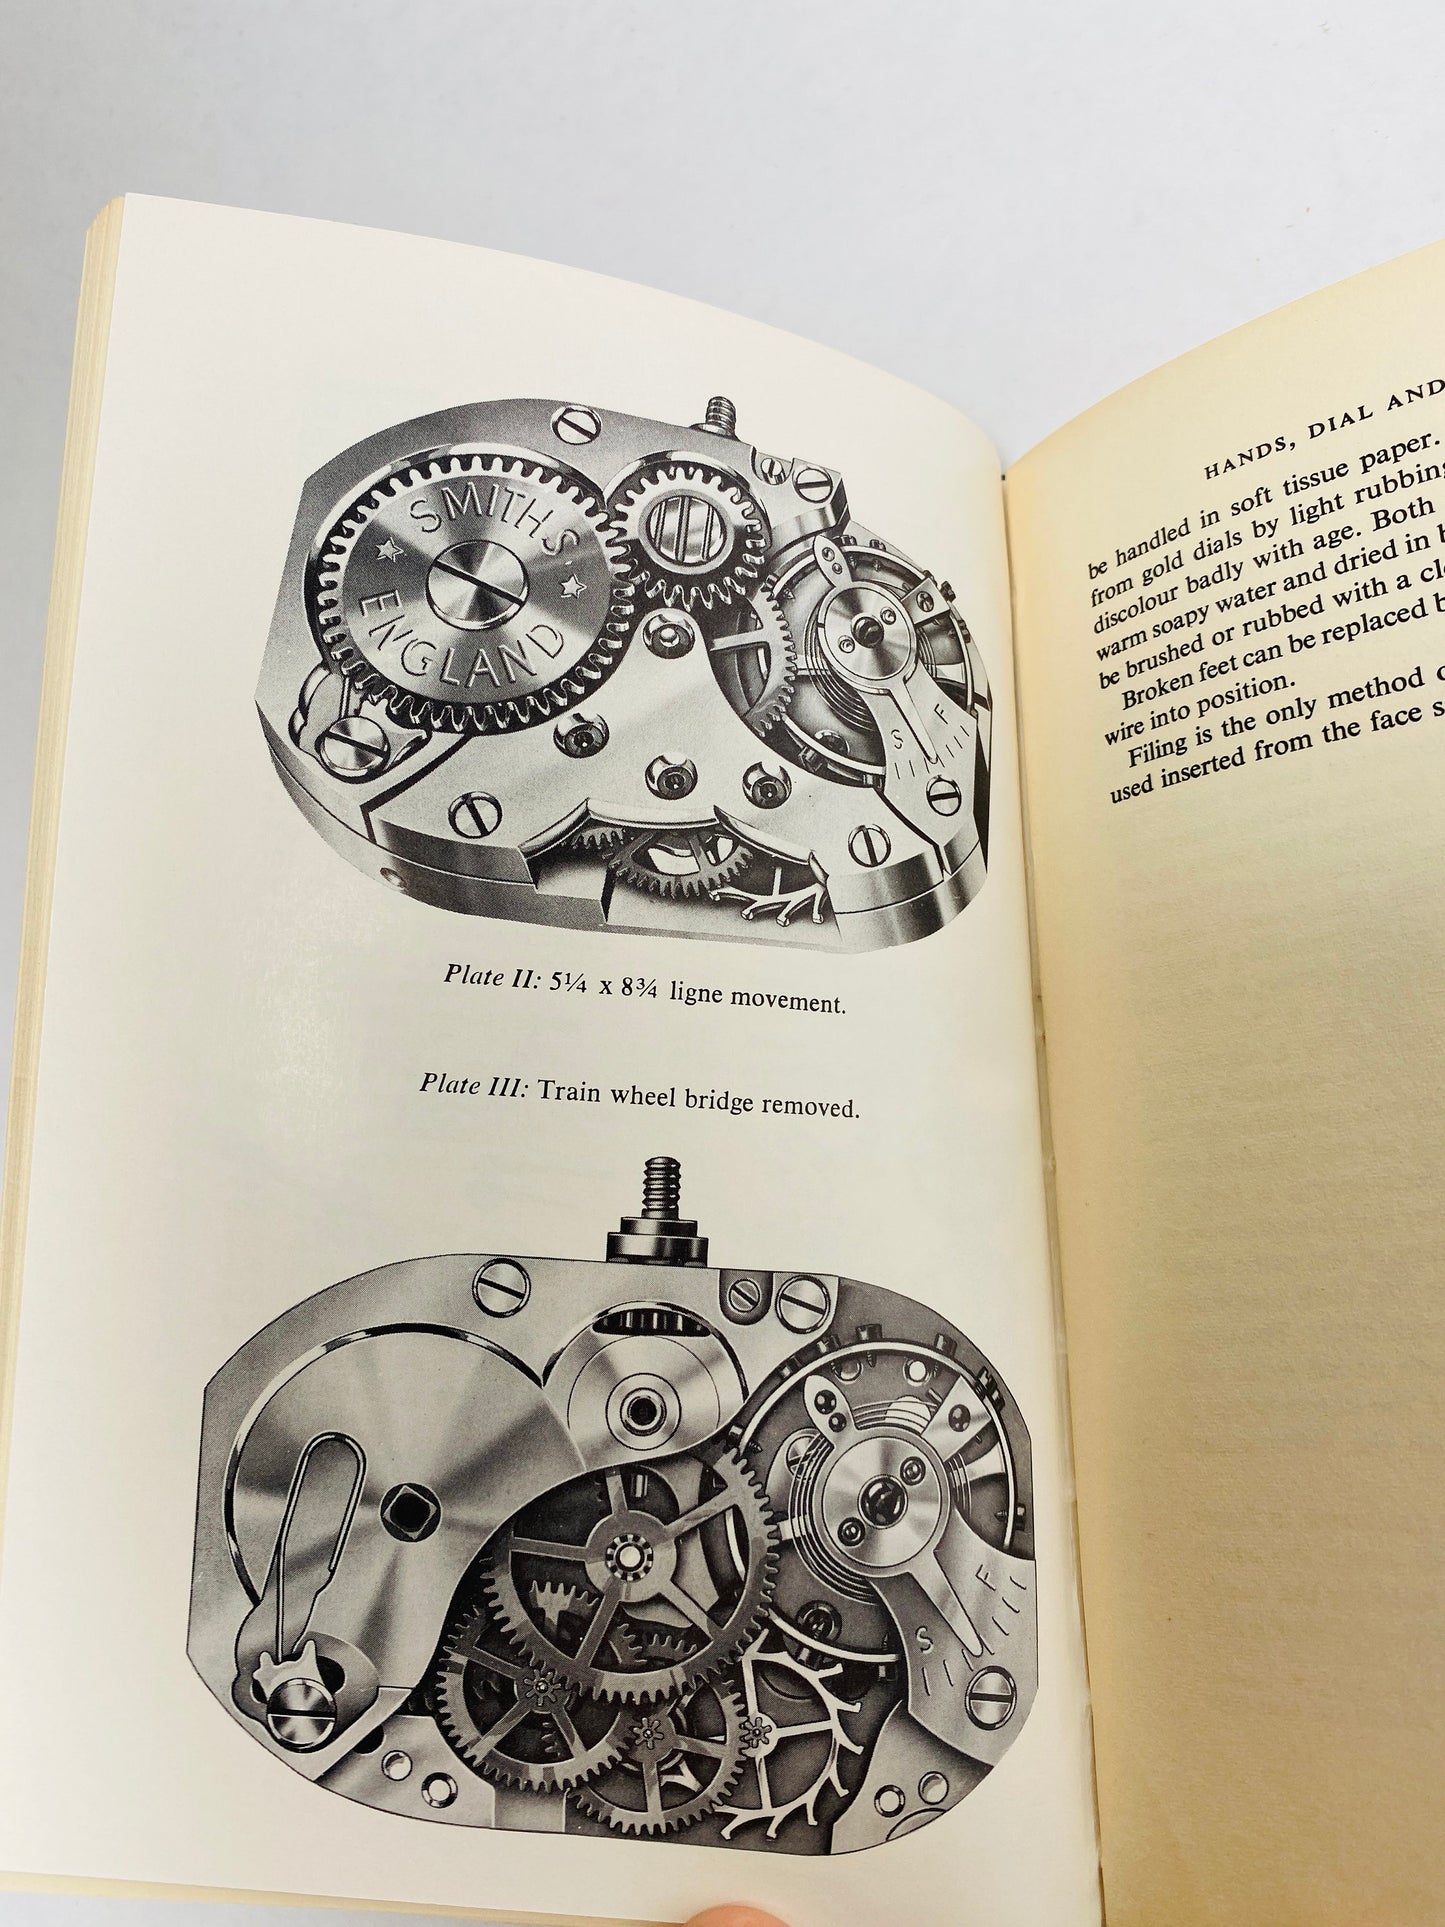 Watch and Clock Repairs vintage book by Harris circa 1967 Industry and Craftsmanship collector gift retro antique guide